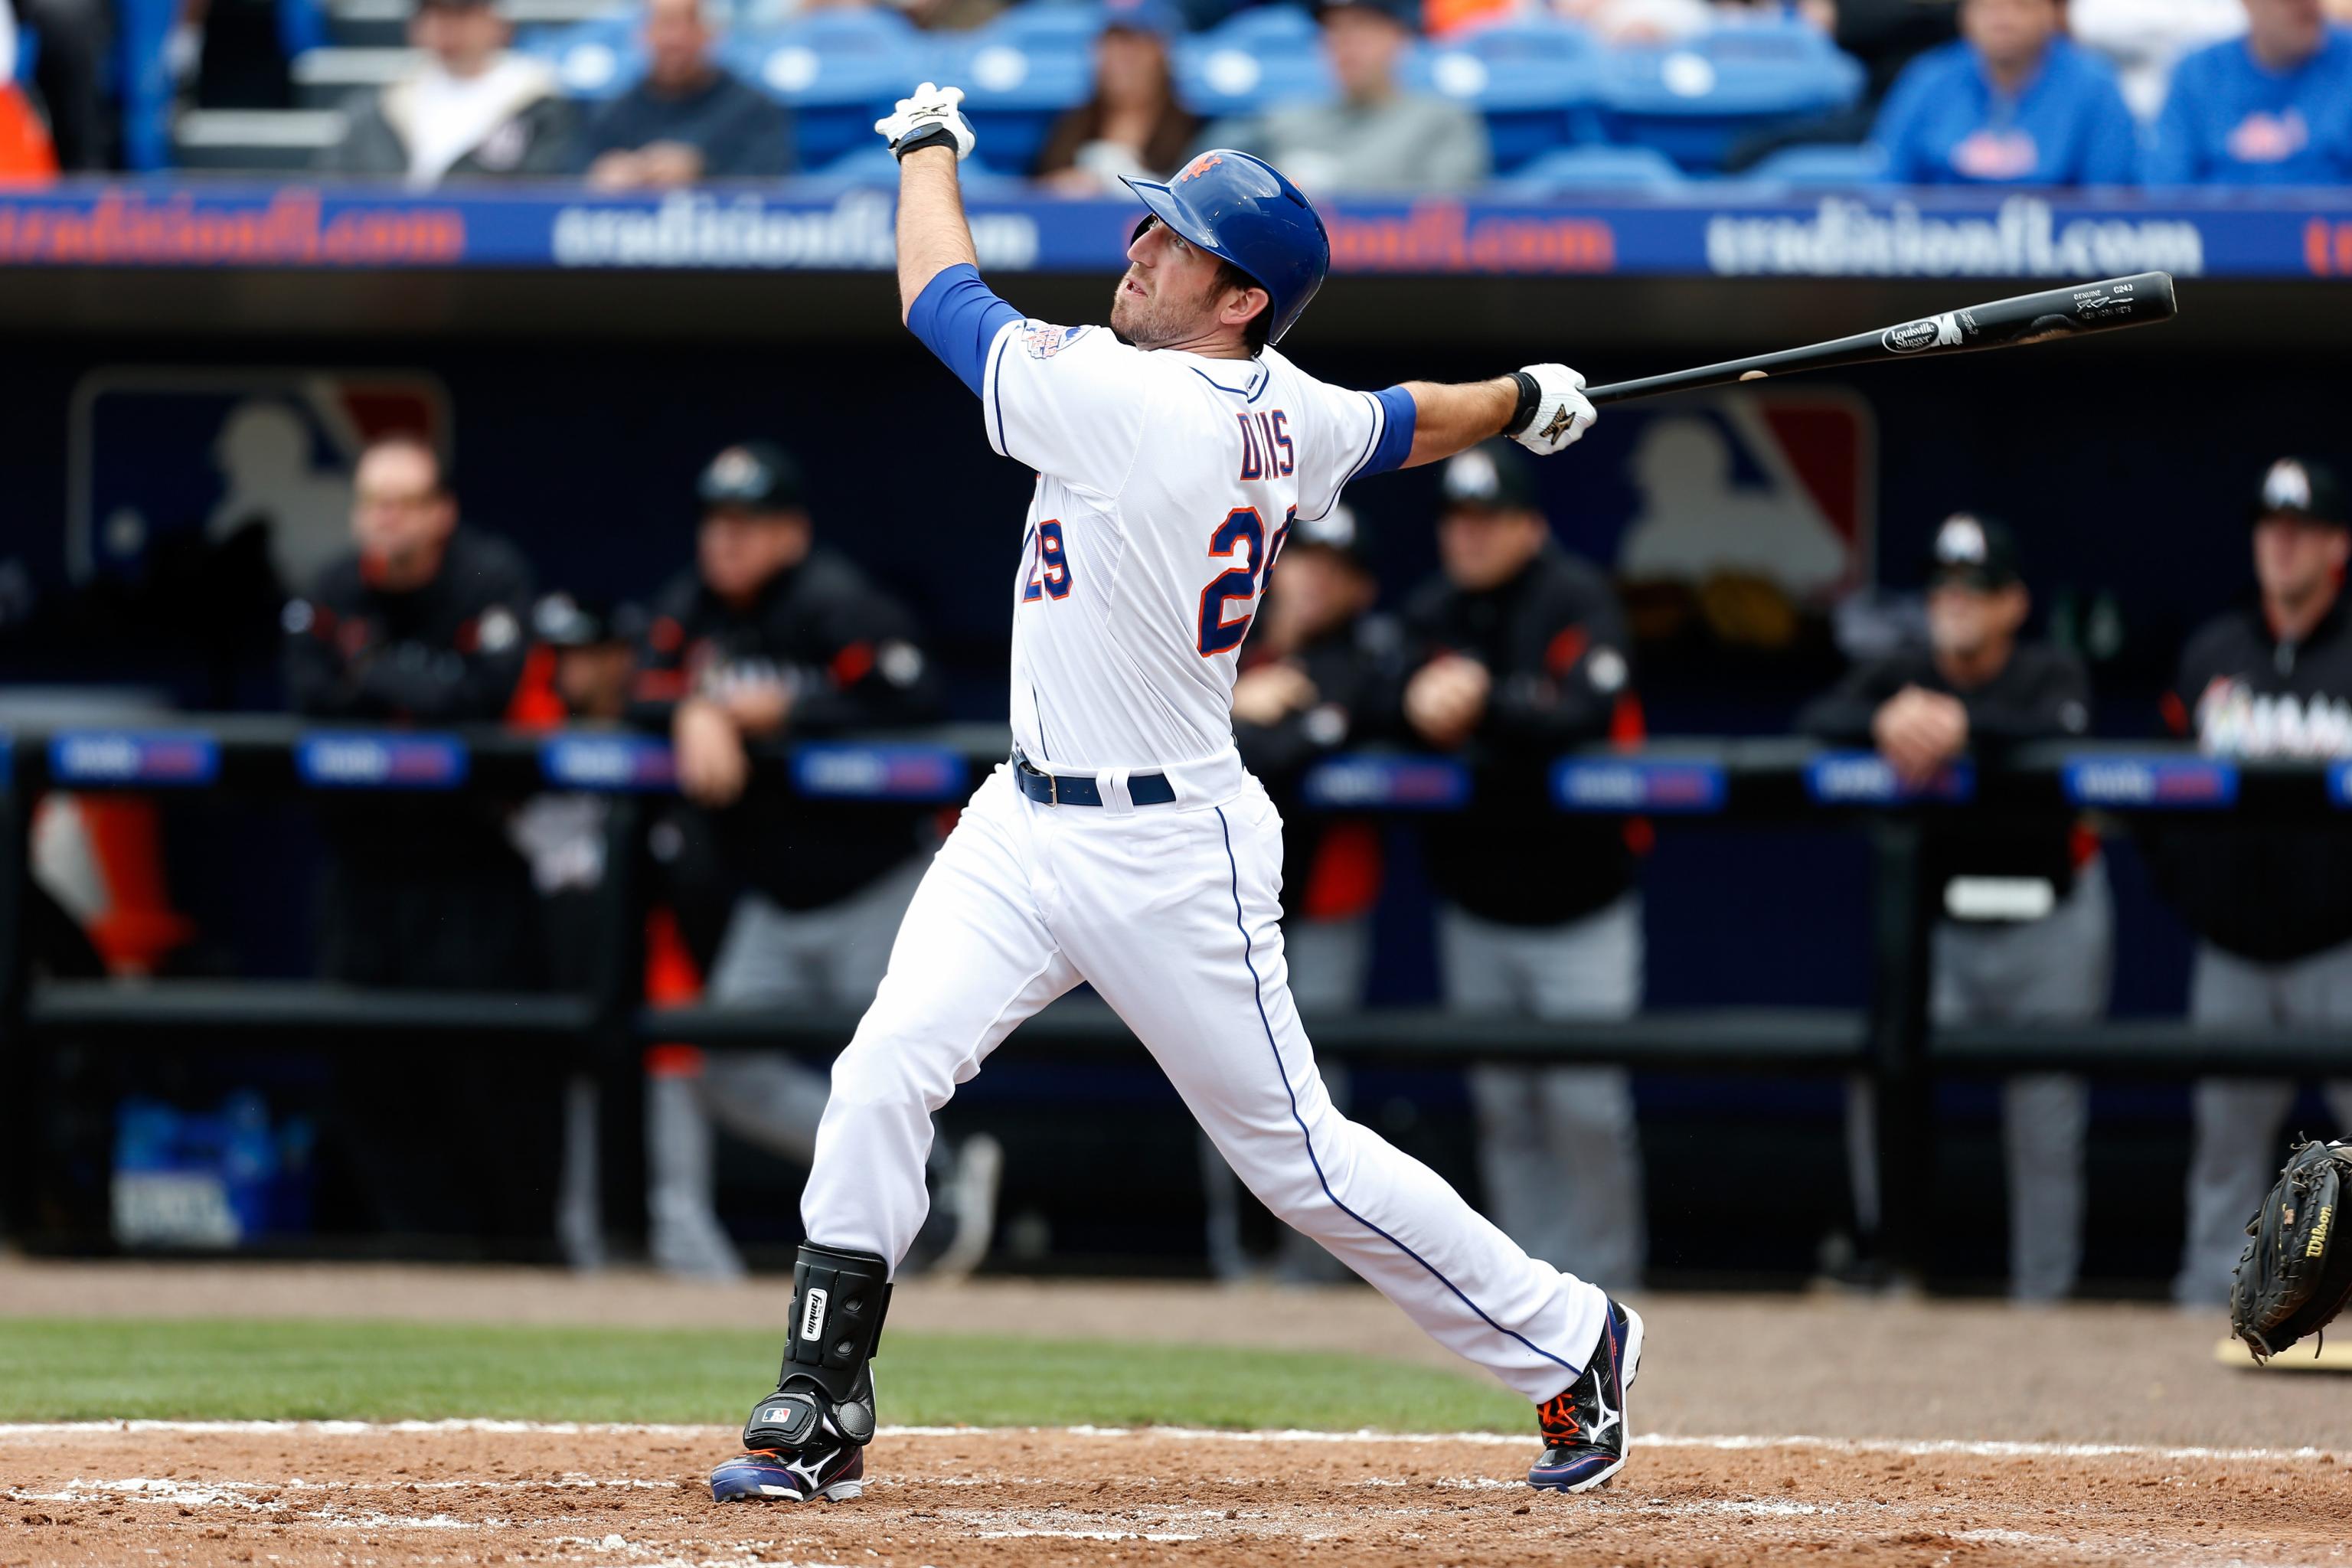 David Wright set to pinch hit for the Mets Friday night before starting his final  game Saturday – New York Daily News